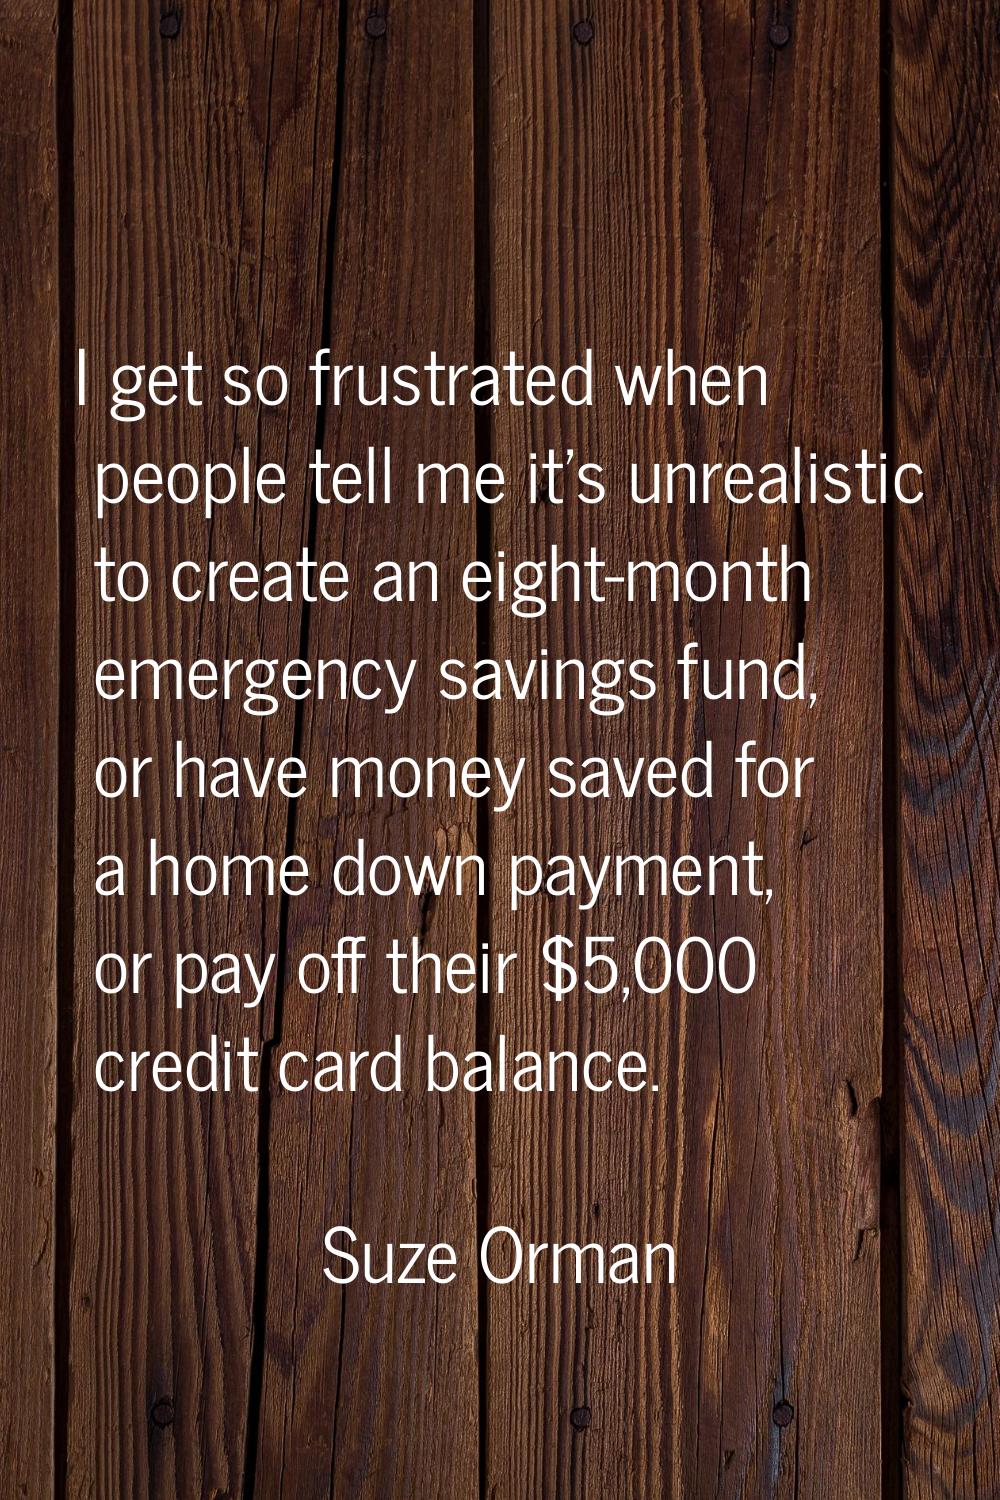 I get so frustrated when people tell me it's unrealistic to create an eight-month emergency savings